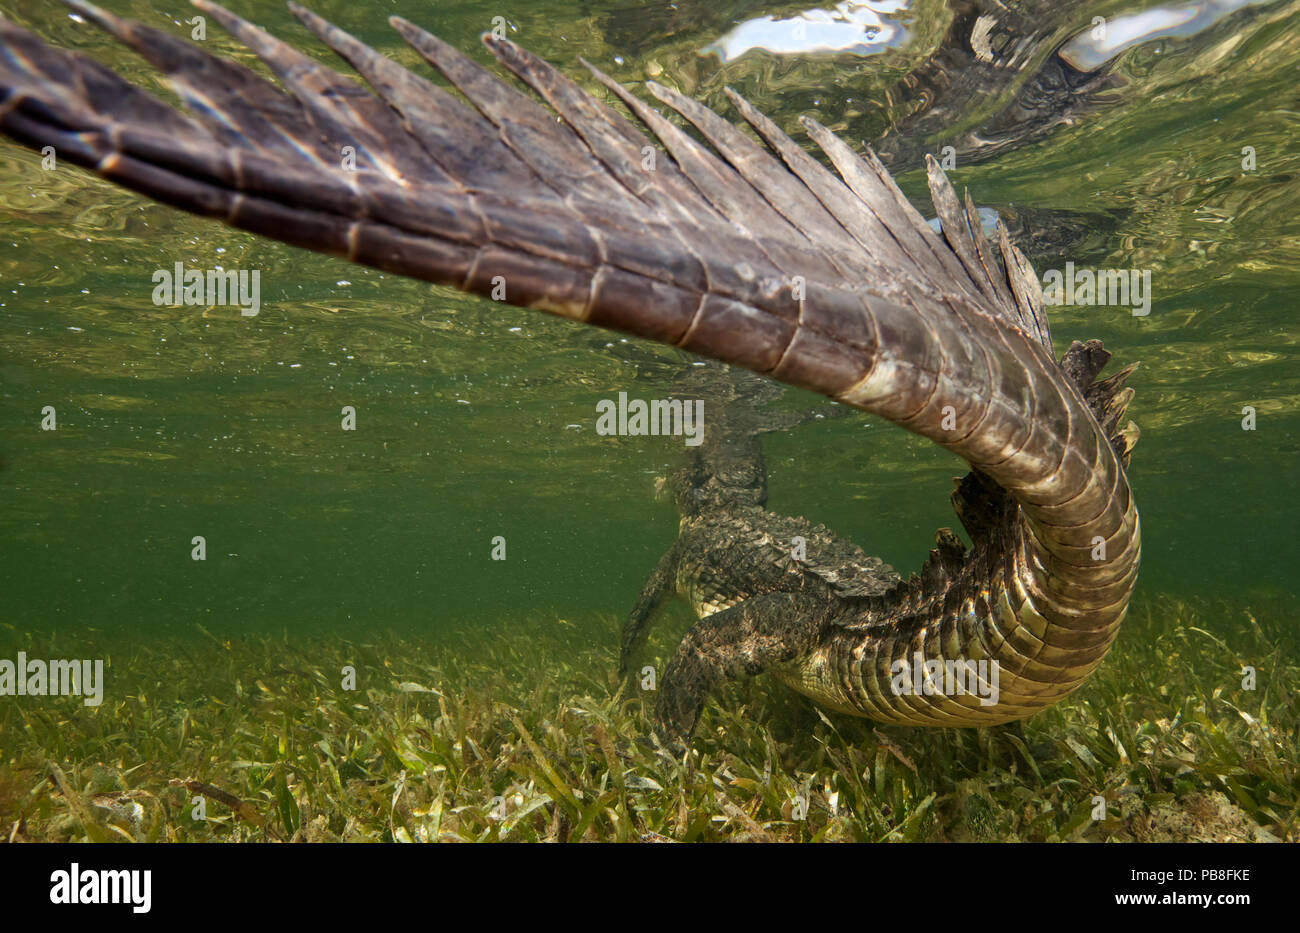 American crocodile (Crocodylus acutus) rear view of animal resting in shallow water, close up of tail, Banco Chinchorro Biosphere Reserve, Caribbean region, Mexico Stock Photo